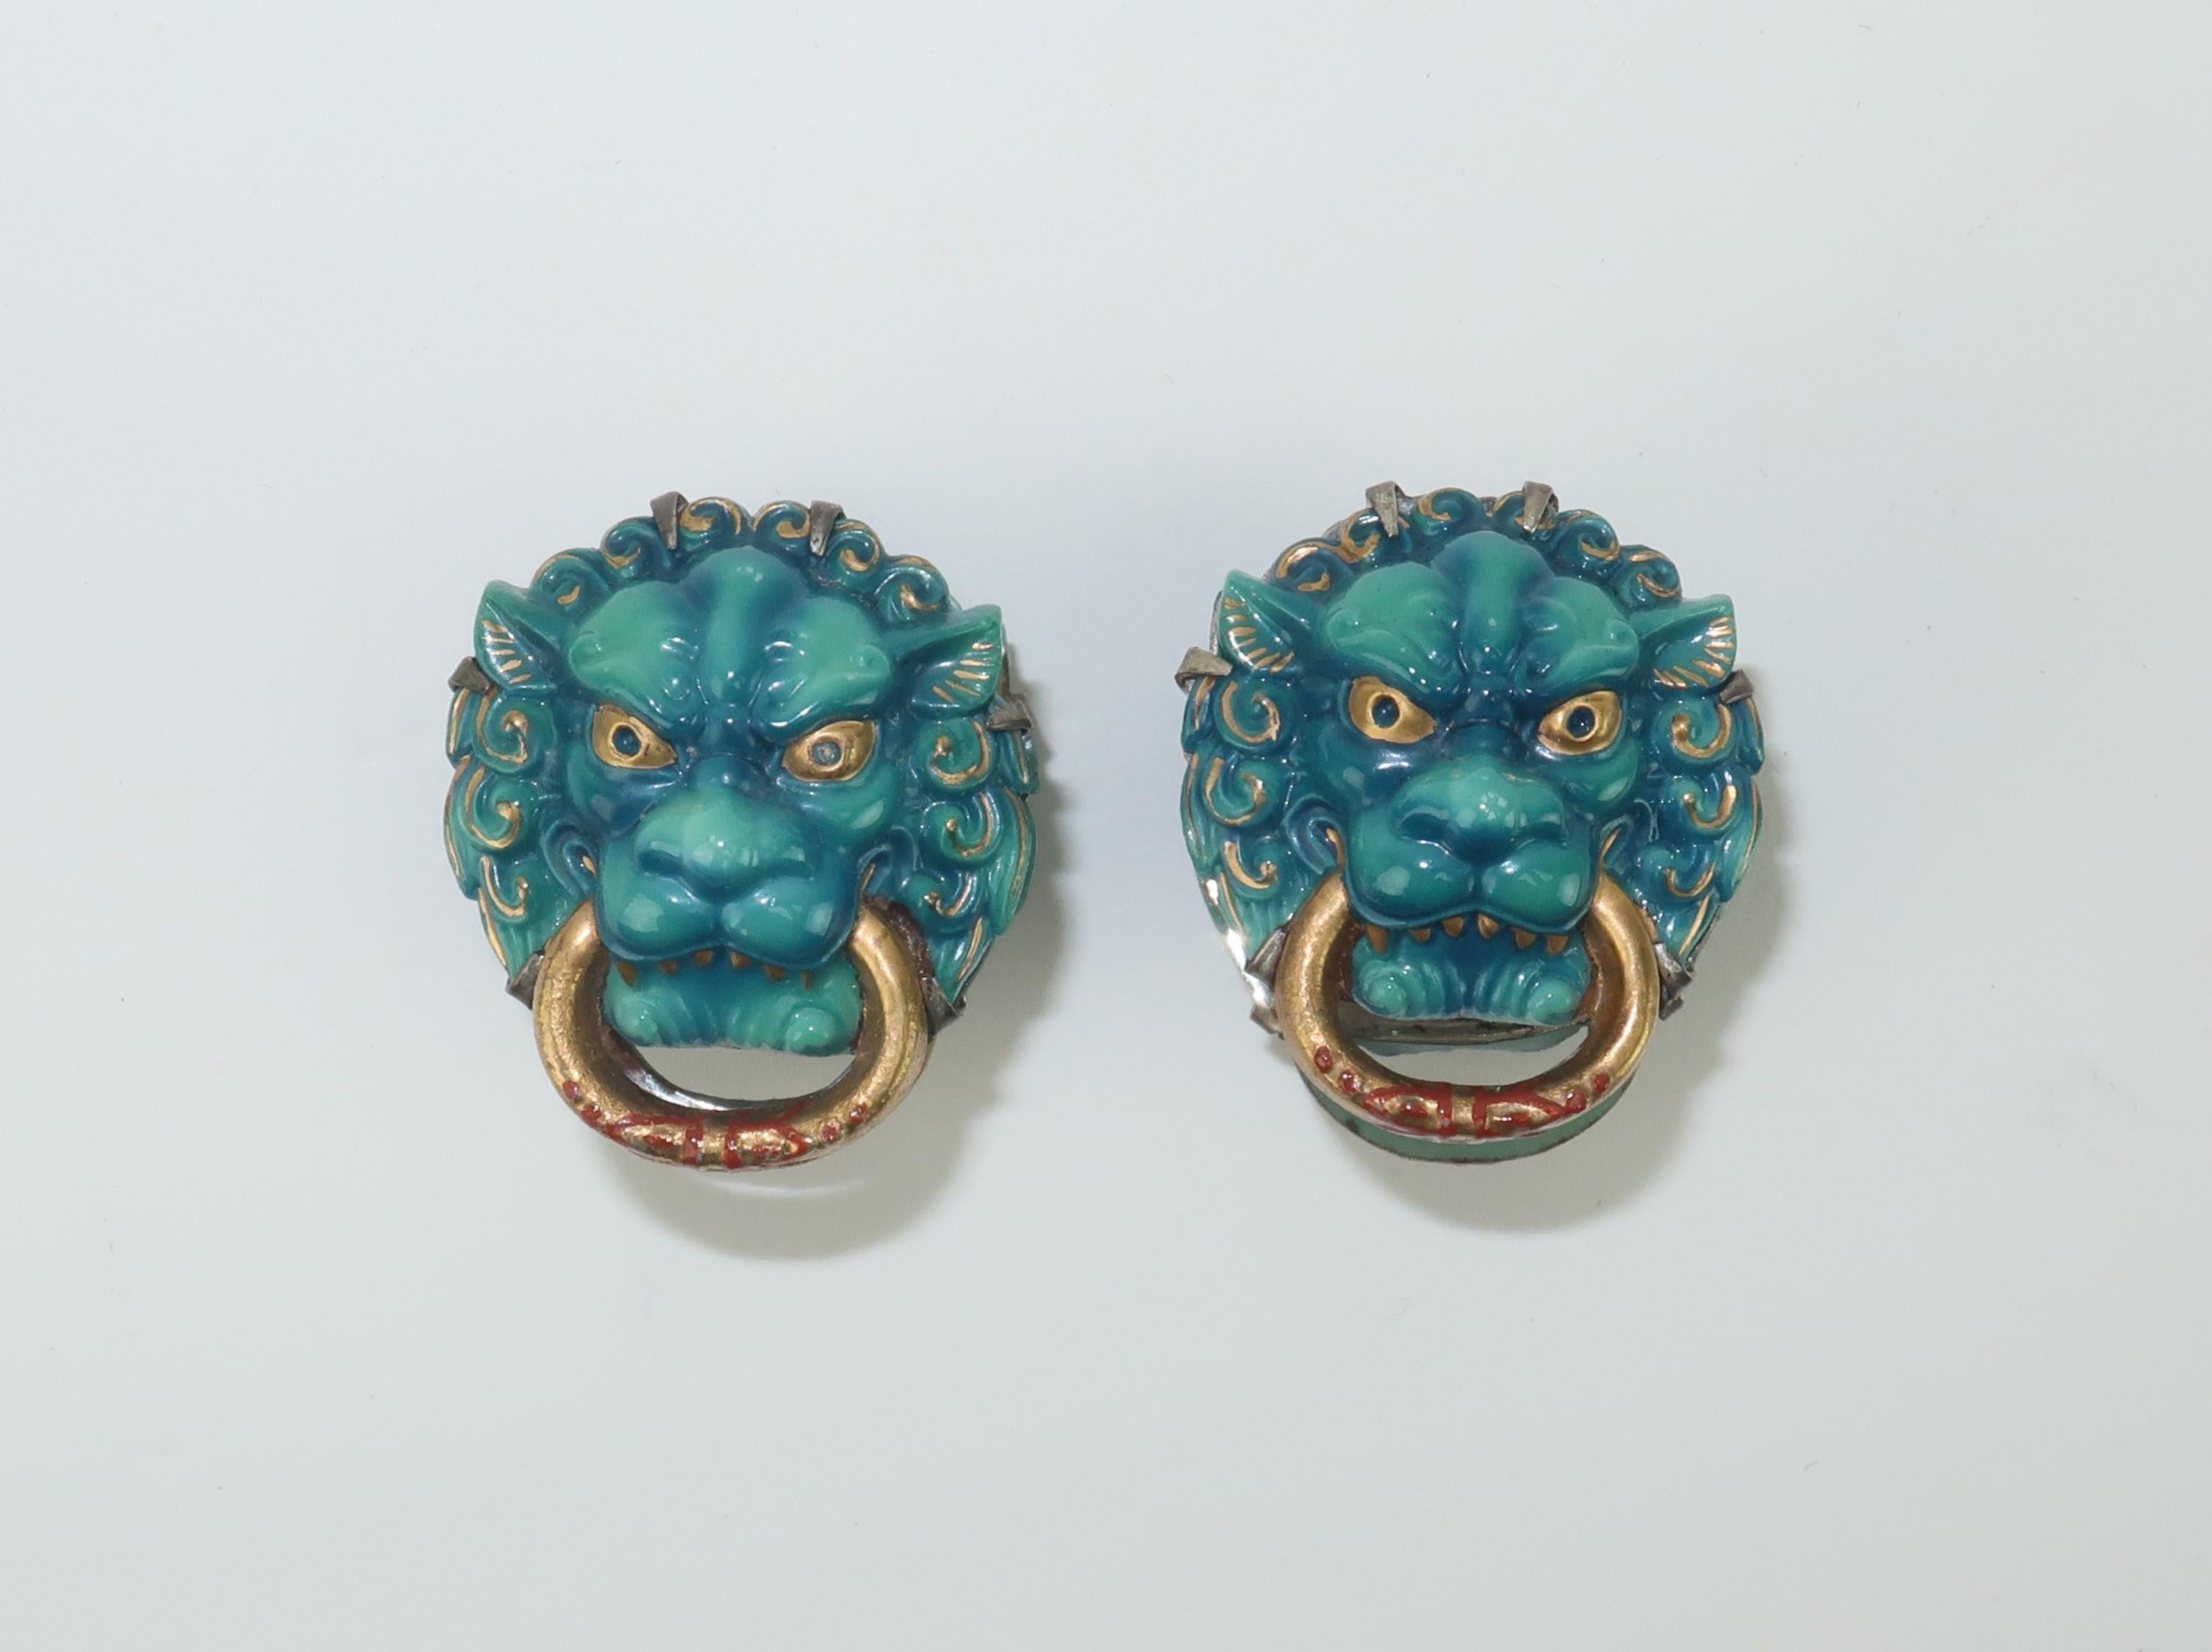 1950's Japanese porcelain foo dog cufflinks set in silver by the Toshikane Company.  The hand painted enameled porcelain foo dogs are incredibly detailed mixing shades of a deep aqua blue and gold with just a touch of red.  The unique cufflinks snap